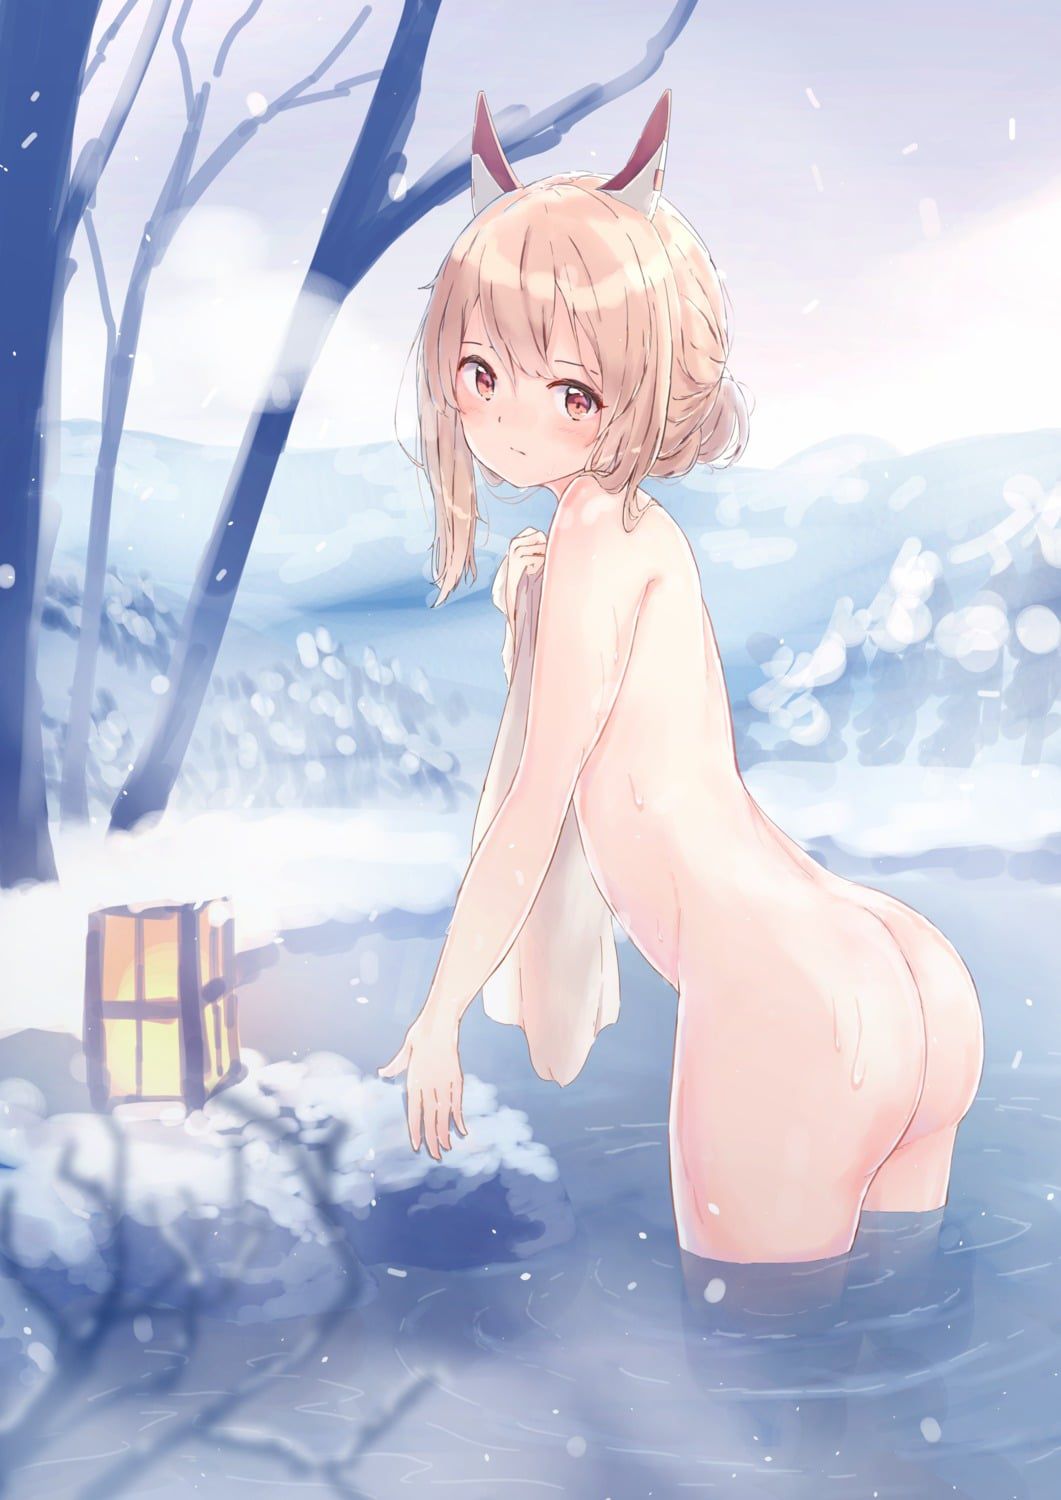 Let's gaze at the bath scene of a defenseless girl during relaxation time! 18